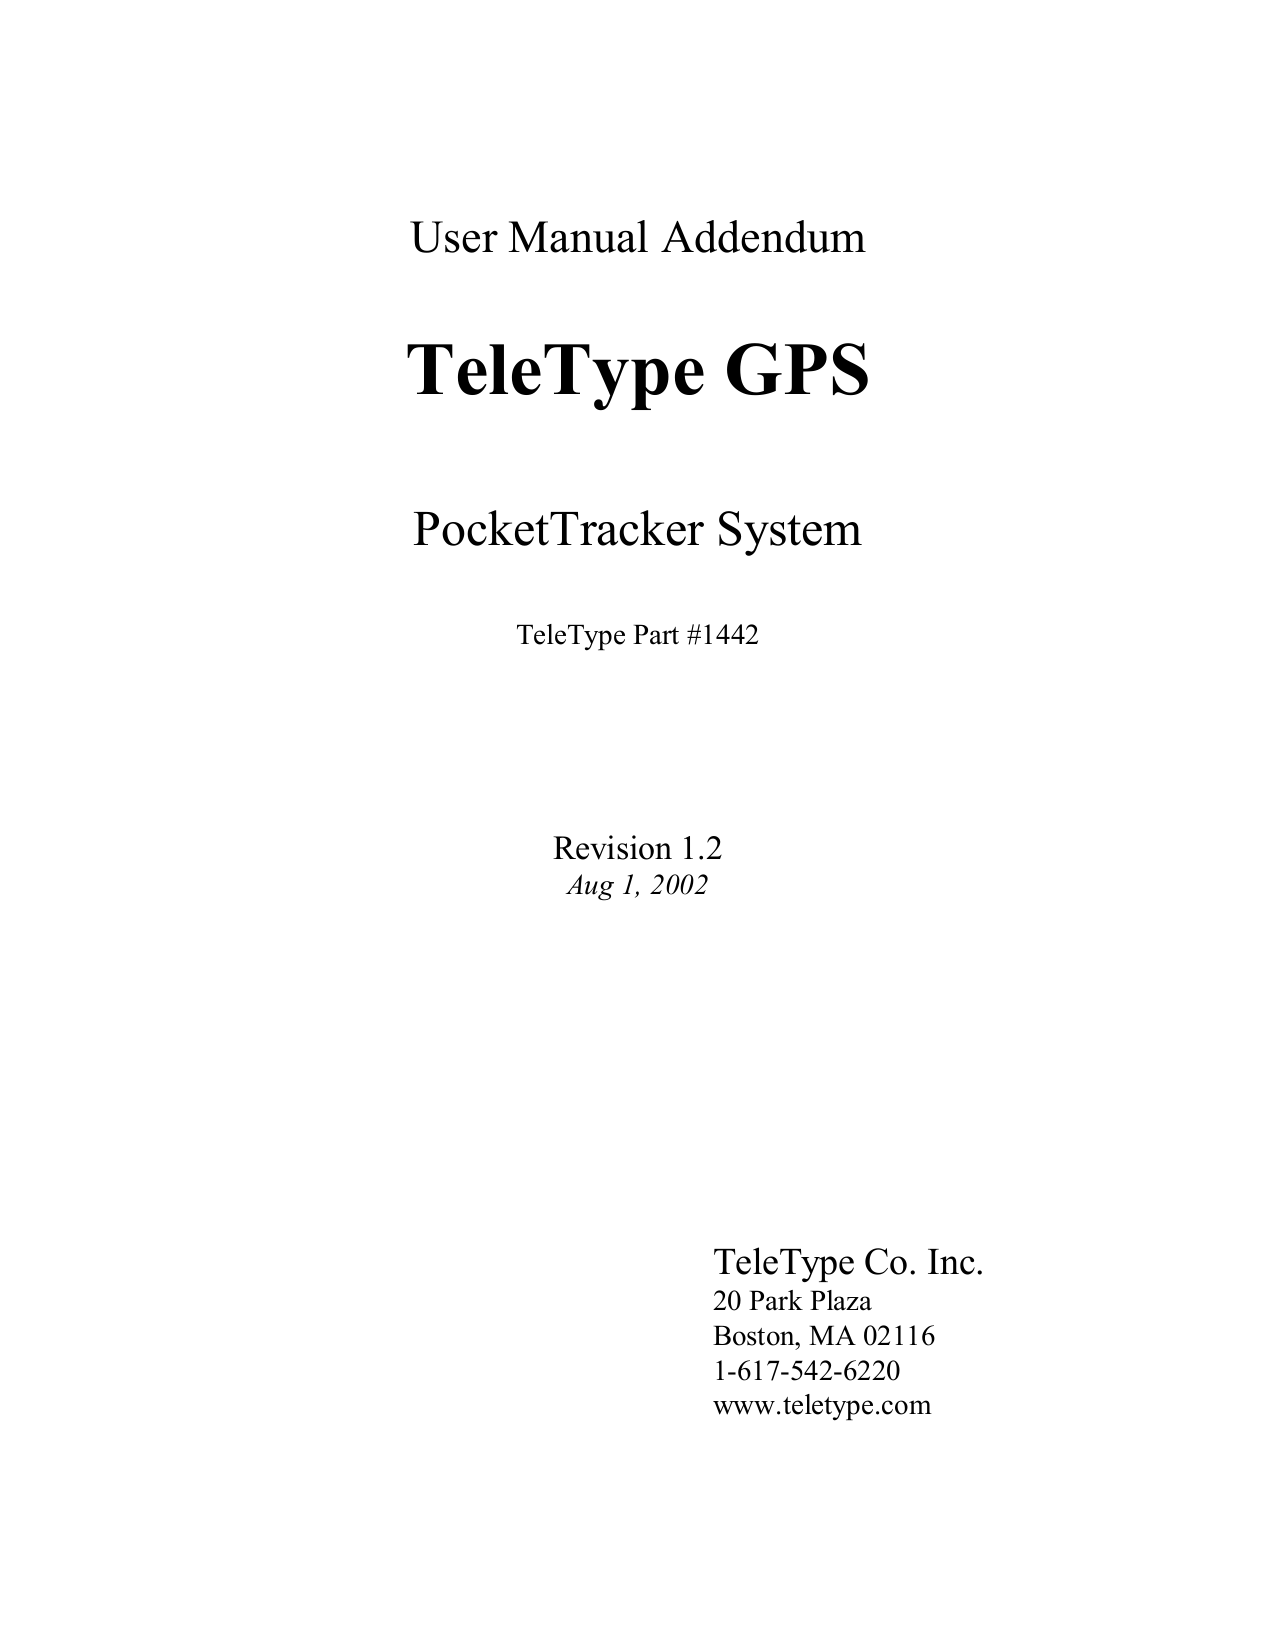 pdf for Teletype Other 1442 PocketTracker System manual